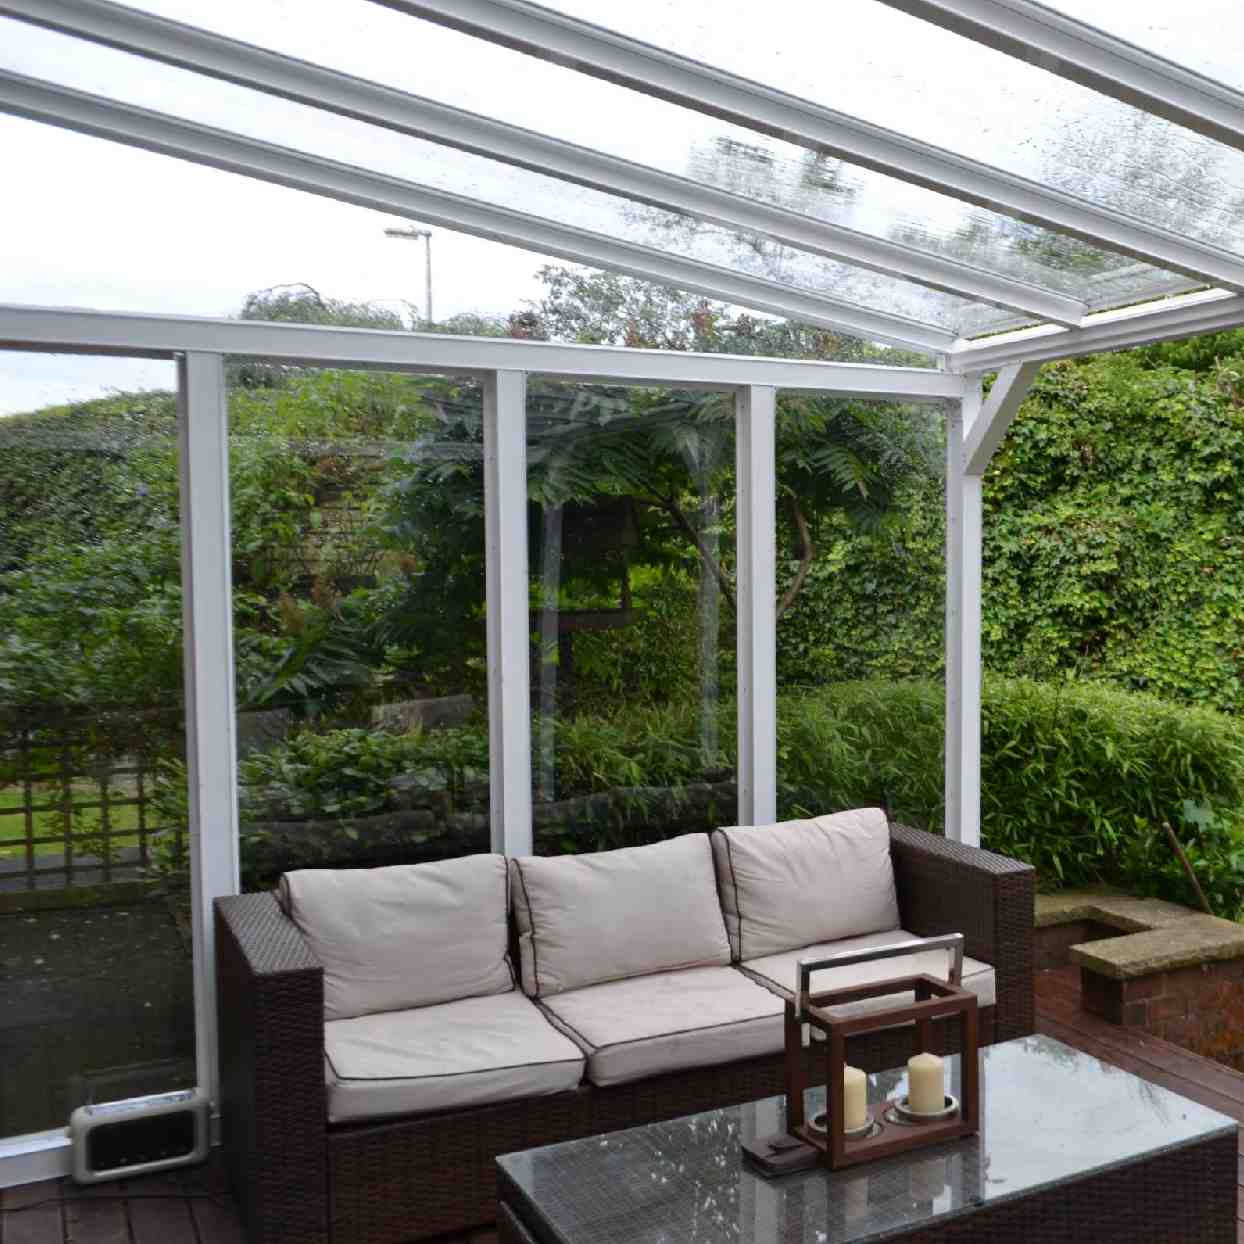 Buy Omega Verandah White with 16mm Polycarbonate Glazing - 8.0m (W) x 4.5m (P), (4) Supporting Posts online today